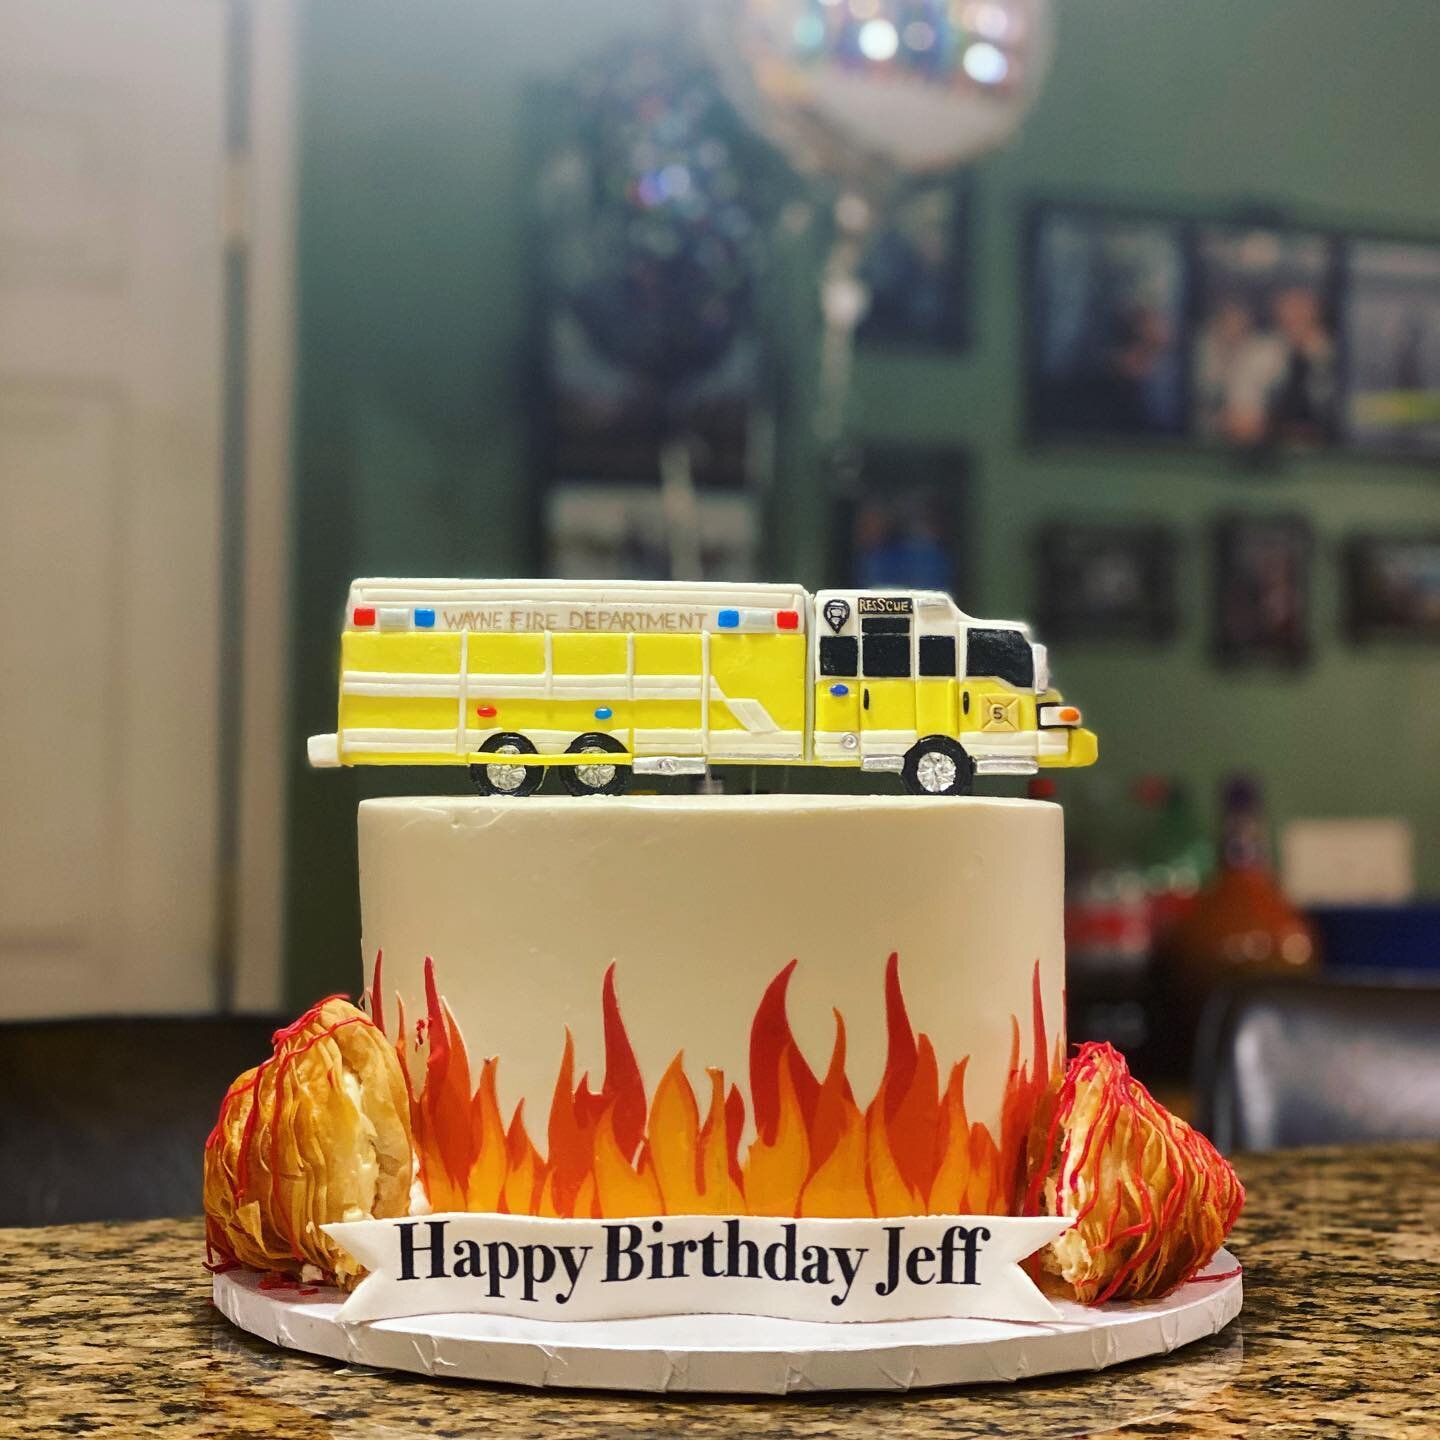 Company 5 style Happy Birthday to our Engineer @jeffdepetris #rescue5